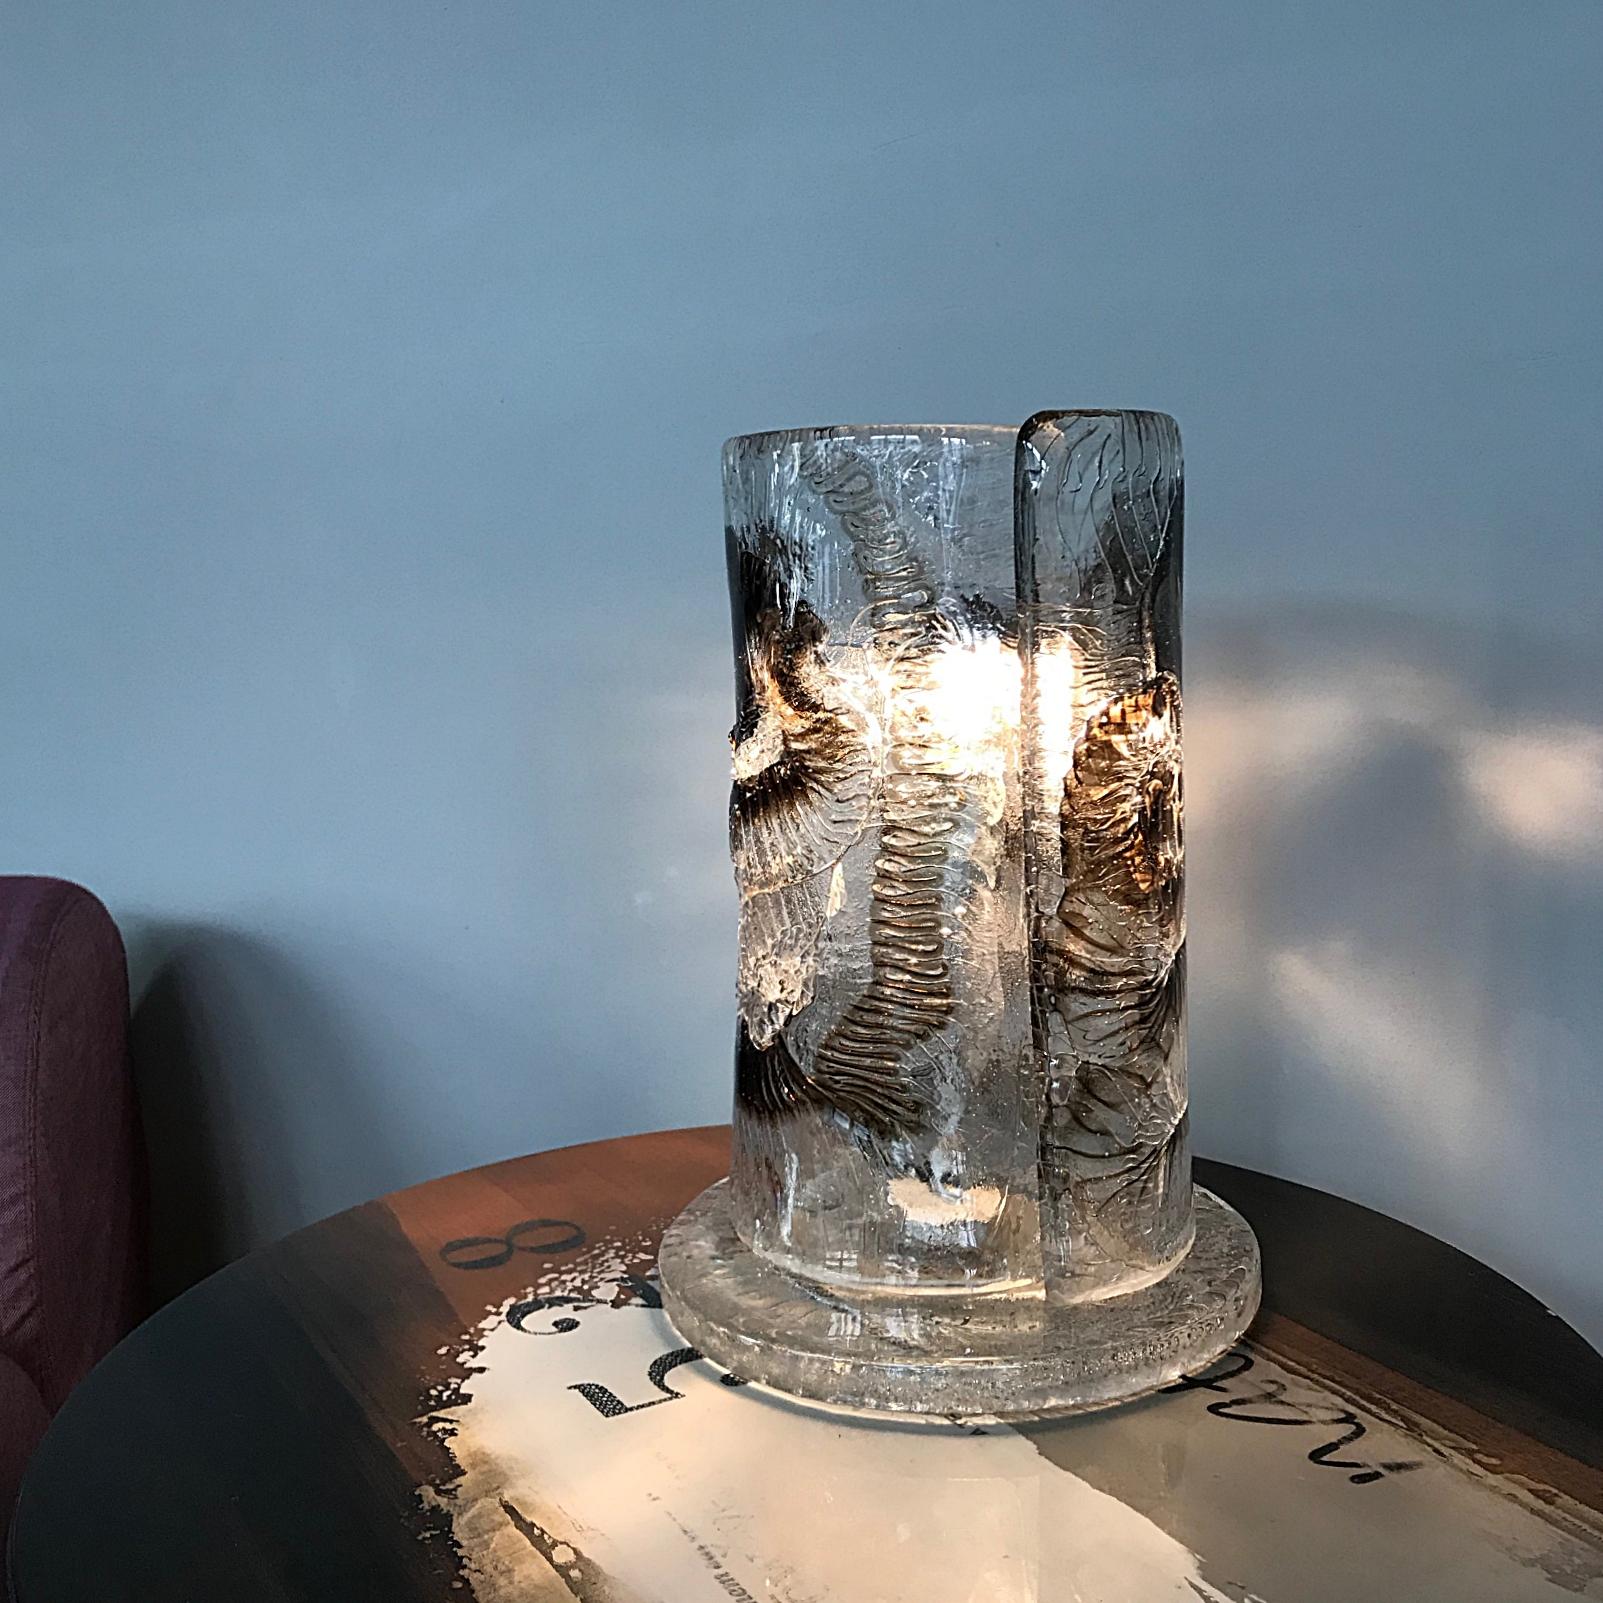 Very rare Space Age table lamp designed and manufactured ba Venini, Venezia. The lamp is made of very heavy Murano art glass that contains air bubbles and stylized fossile fish, the lamp provides smooth and wonderful light. The lamp is in excellent